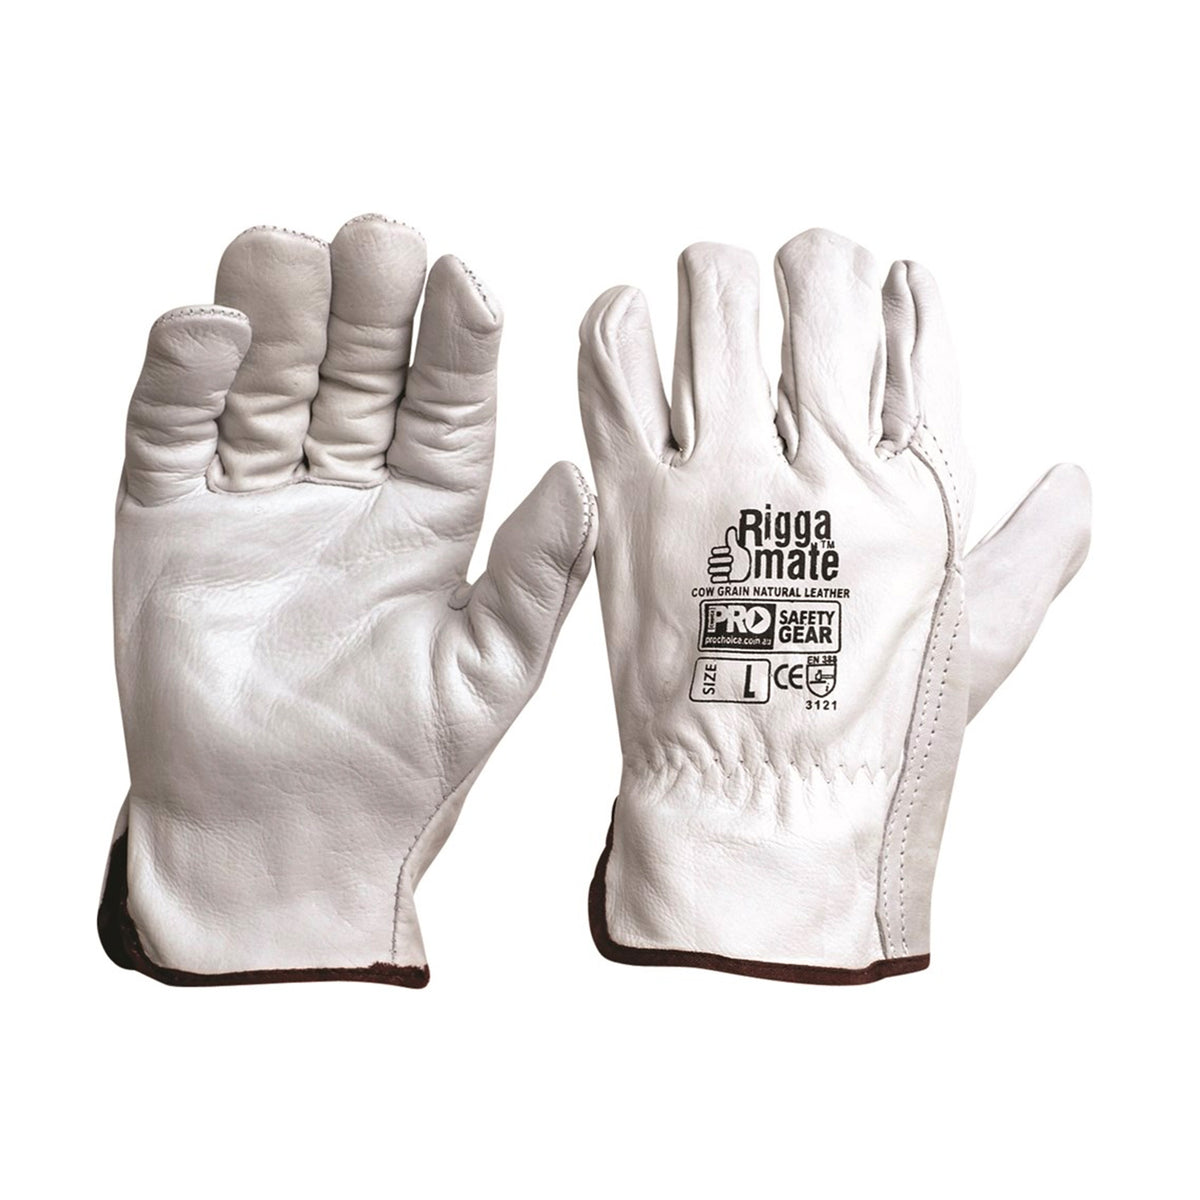 high quality cow grain natural leather gloves